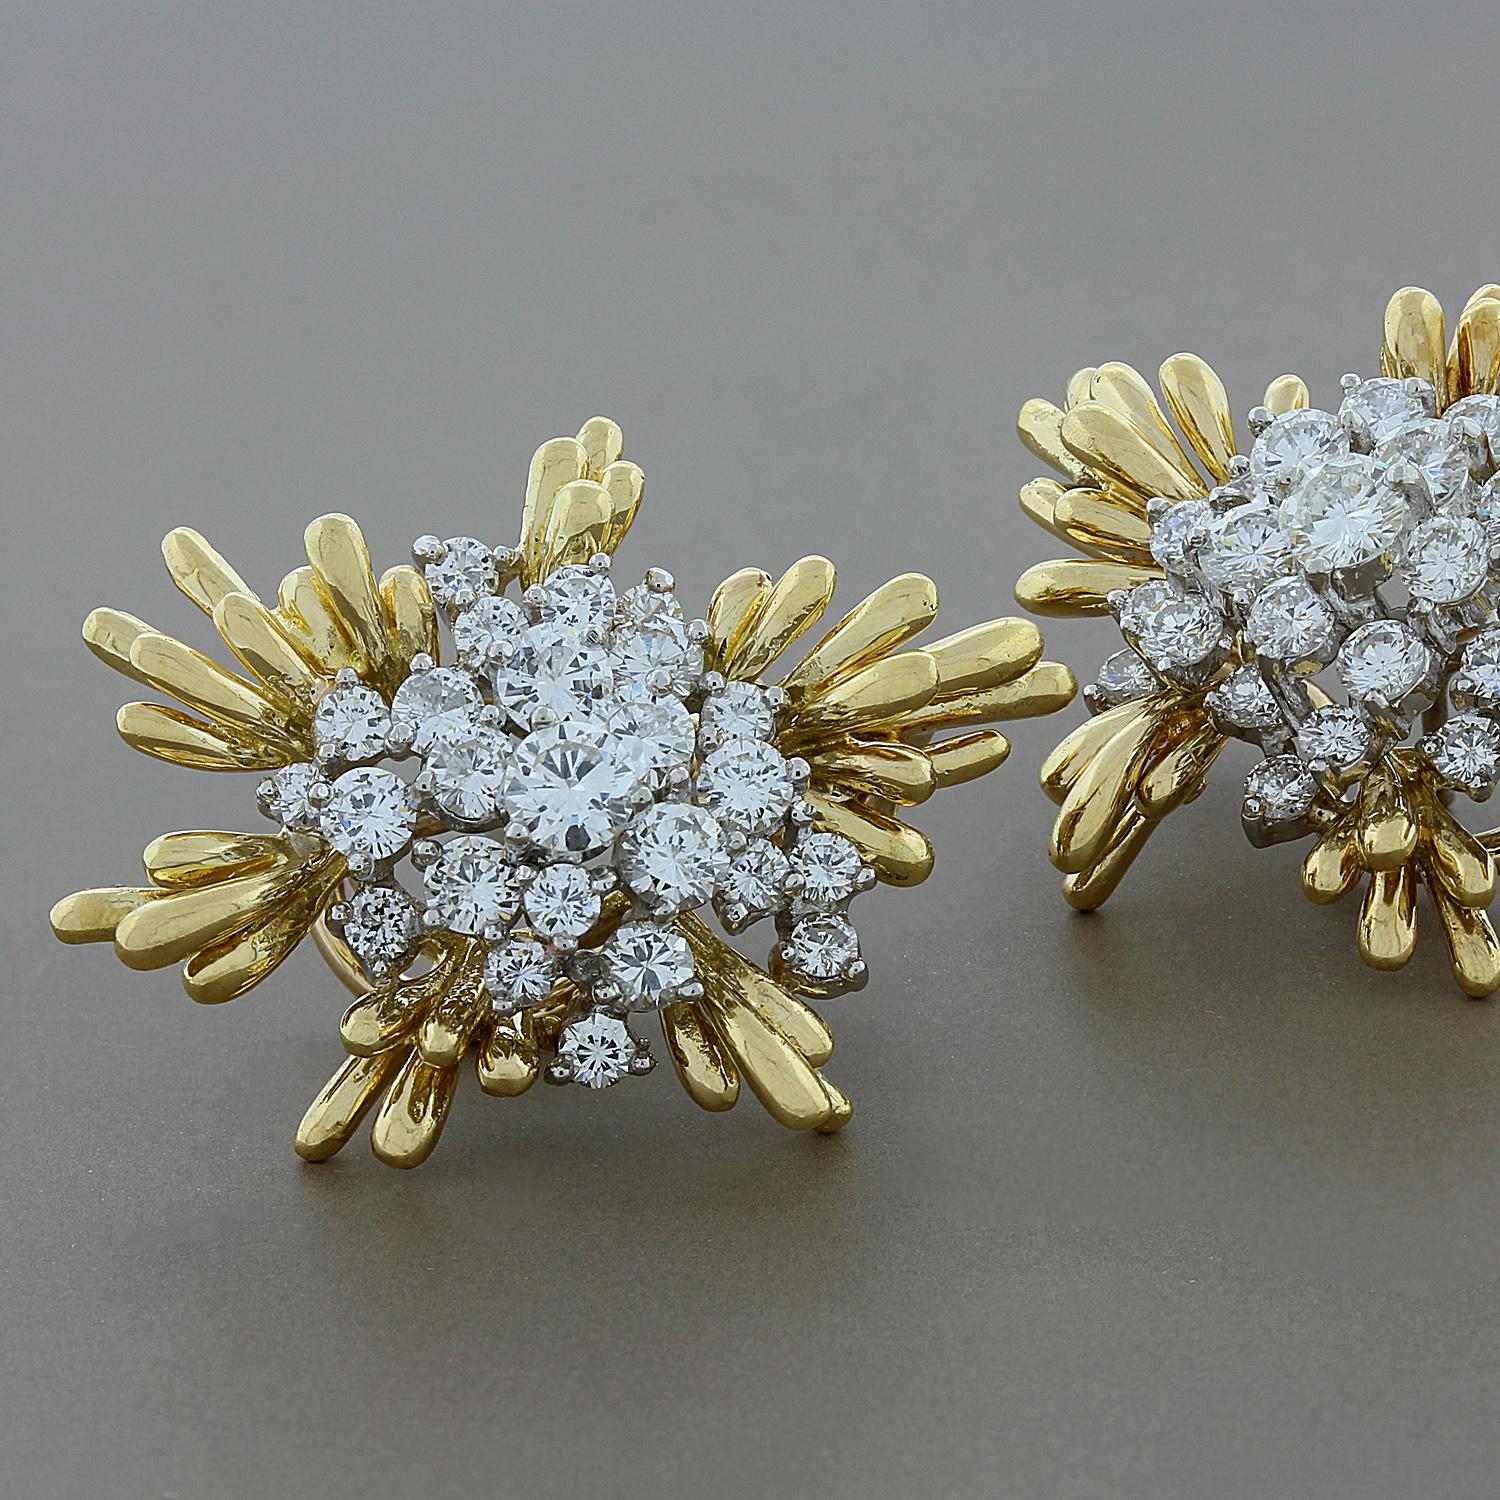 A spectacular pair of diamond gold earrings by Kurt Wayne, known for his eye-catching designs.  These earrings feature 5.00 carats of brilliant VS quality round cut diamonds.  This explosive design is made with 18K yellow gold craftmanship.  The